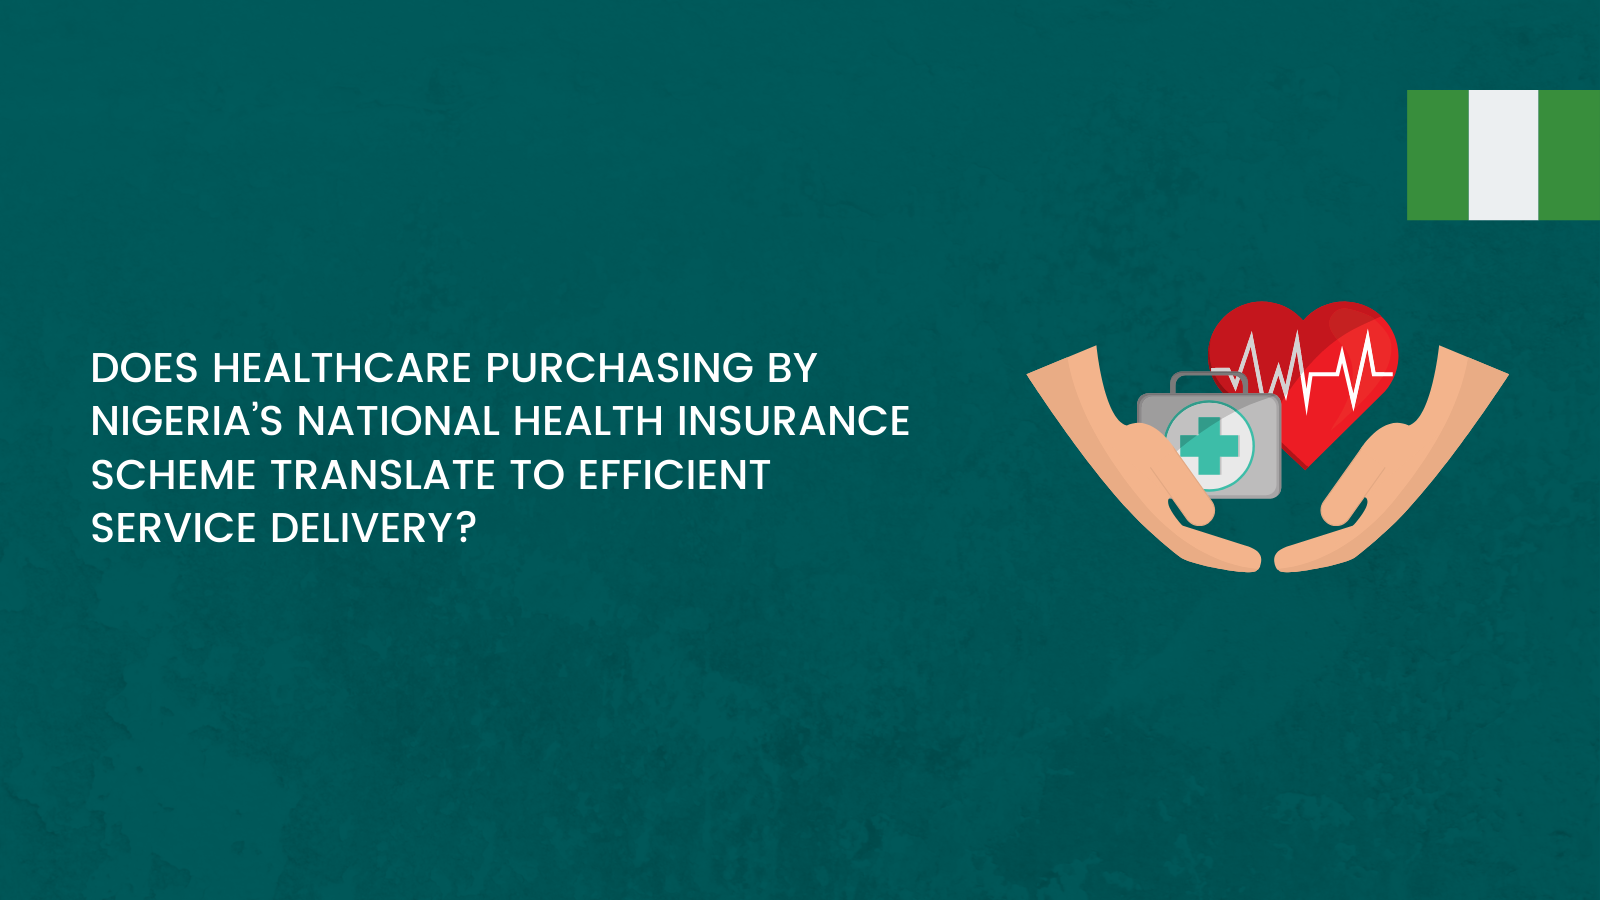 Does Healthcare Purchasing by Nigeria’s National Health Insurance Scheme Translate to Efficient Service Delivery?